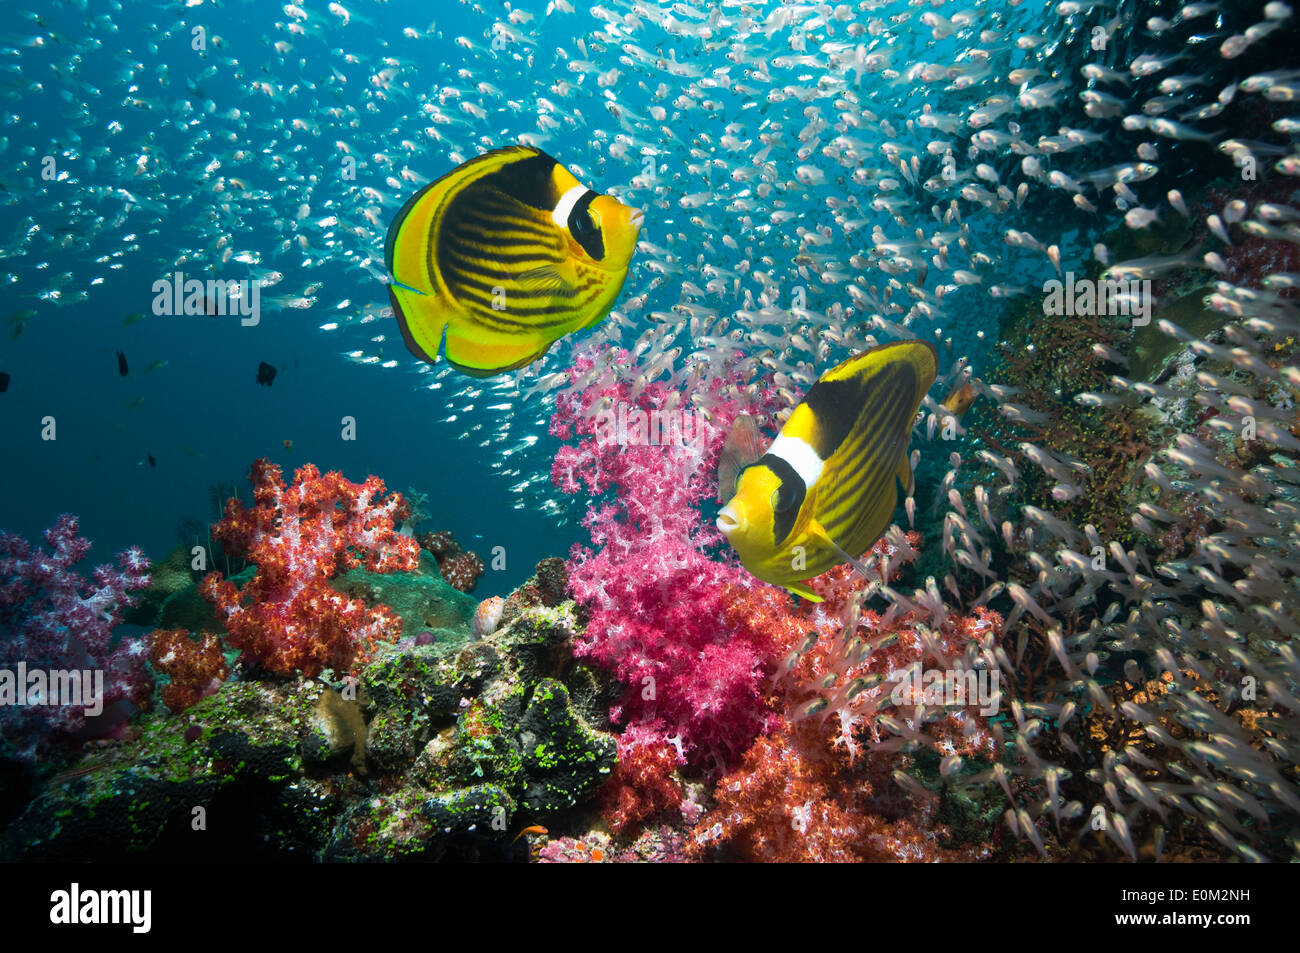 Red Sea racoon butterflyfish, Pygmy sweepers, soft coral (Chaetodon fasciatus), (Parapriacanthus guentheri), (Dendronephthya sp) Stock Photo